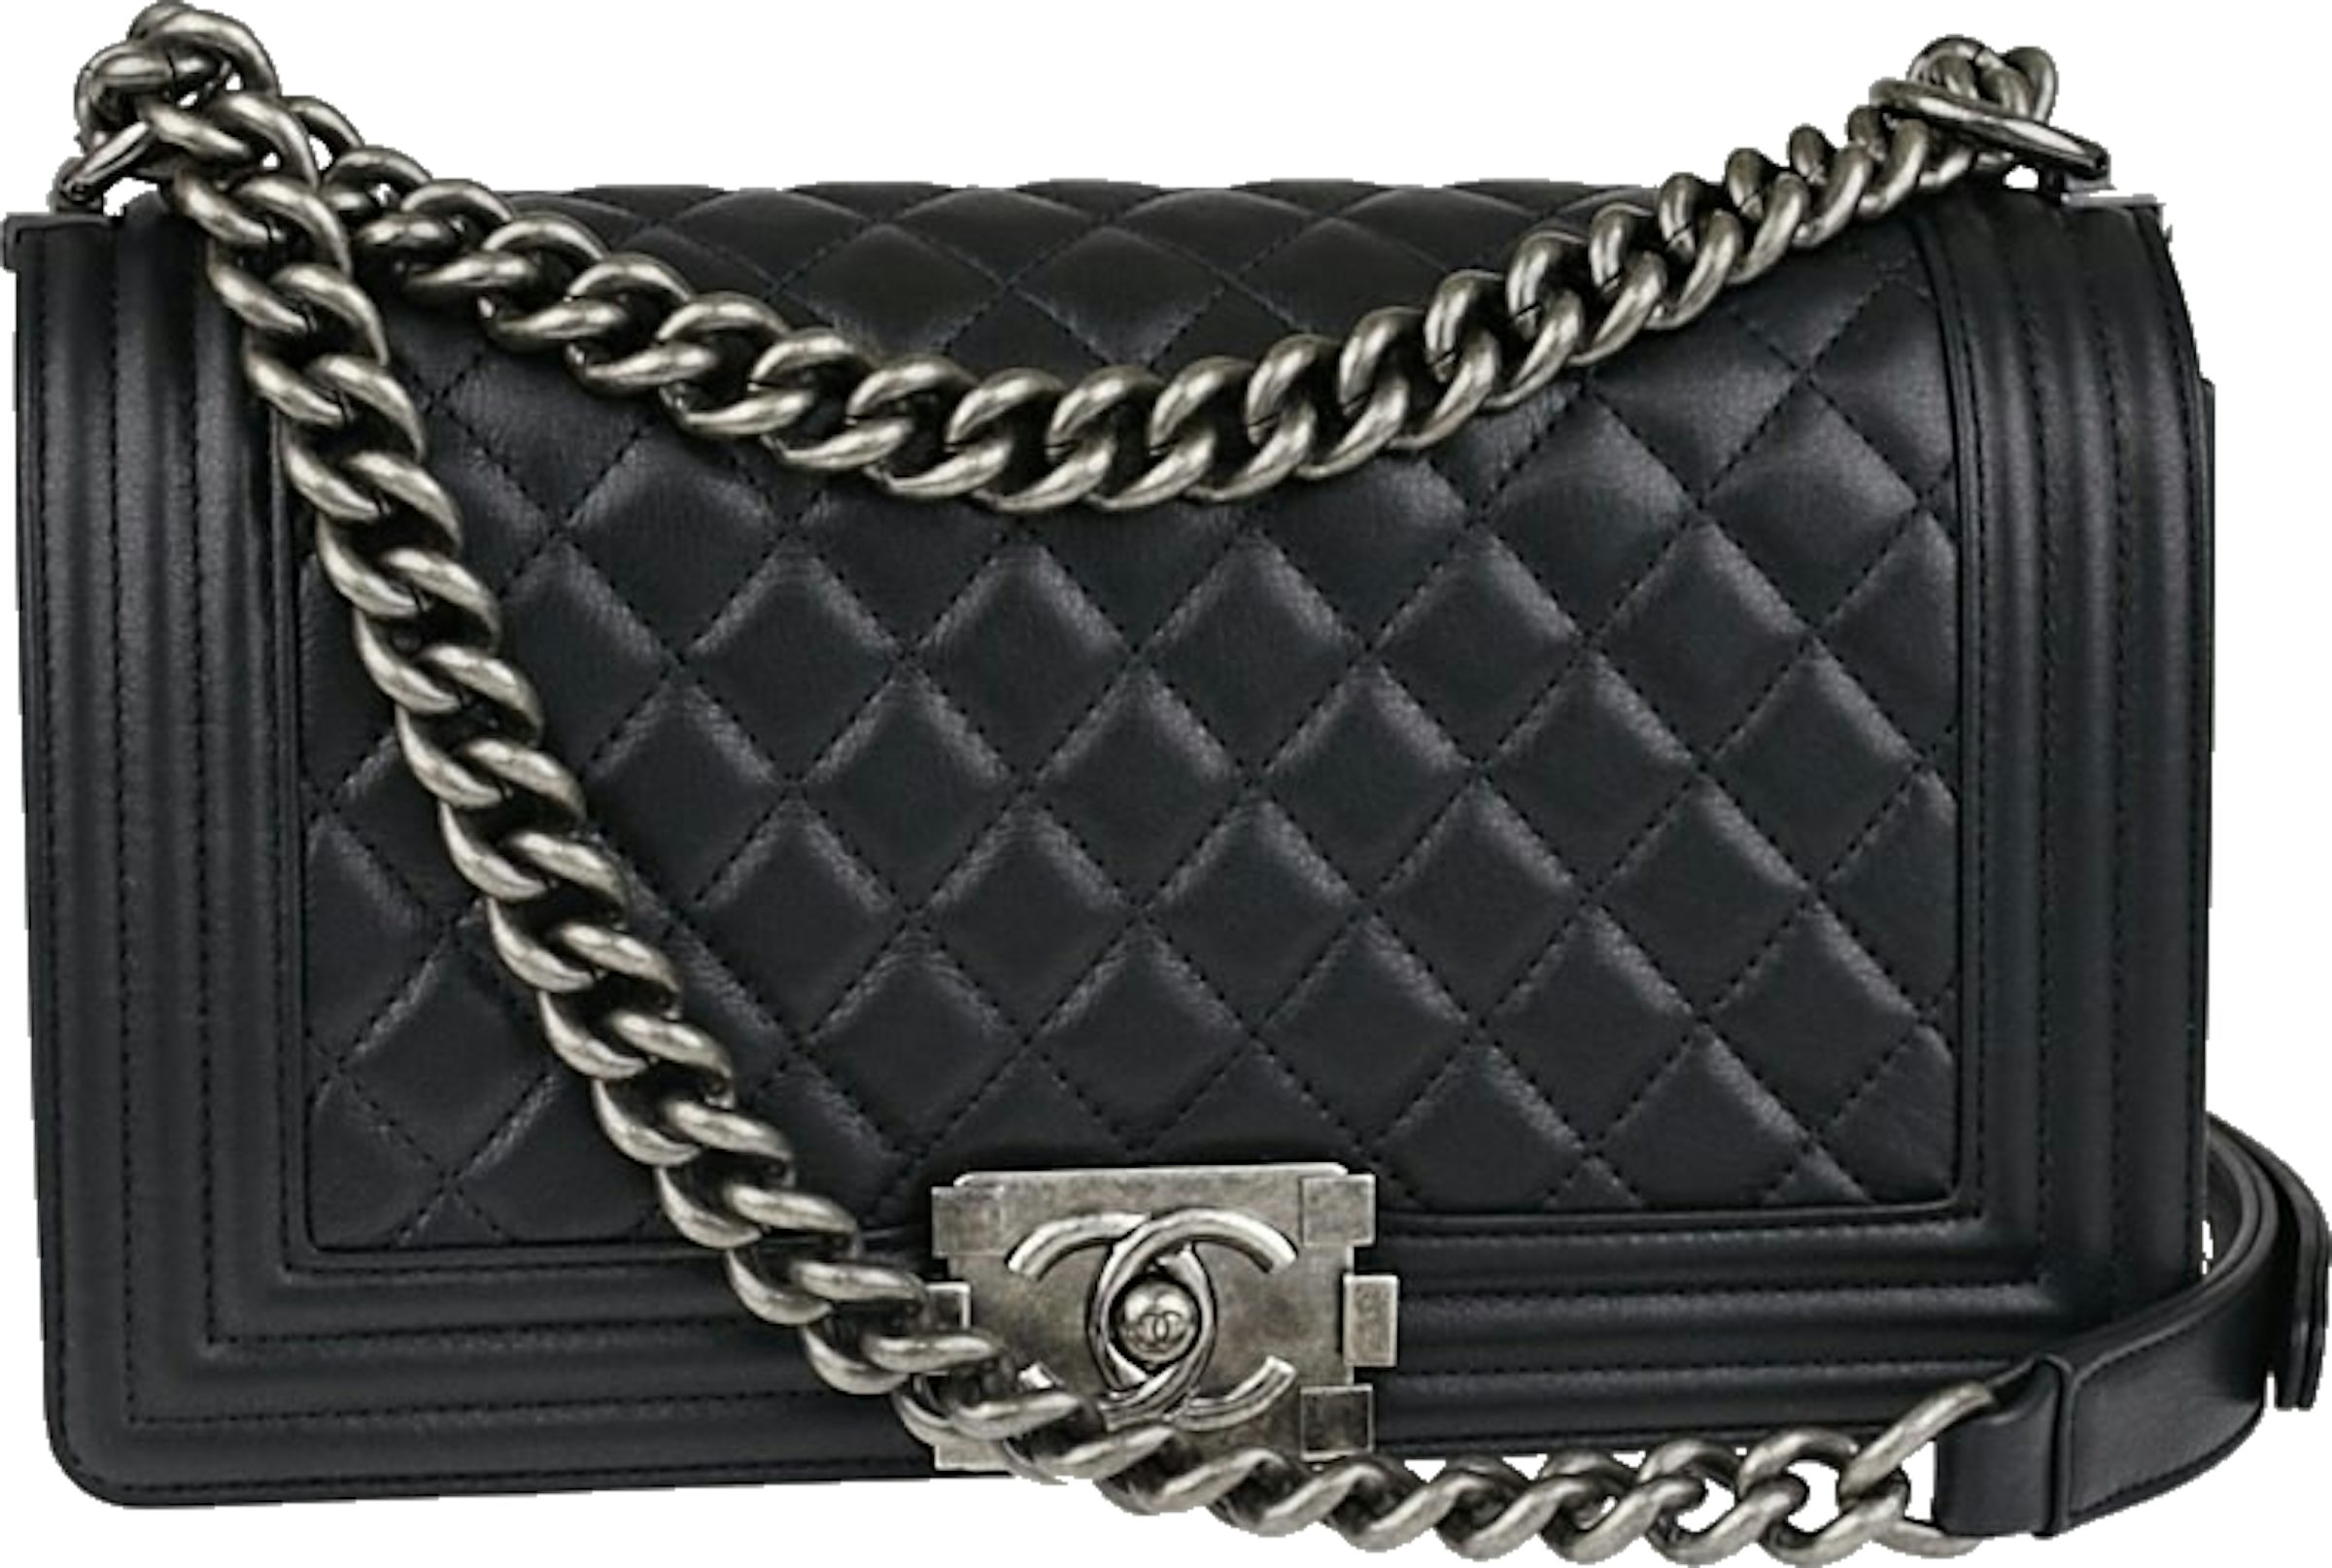 Chanel Metallic Green Quilted Calfskin Large Boy Bag Ruthenium and Enamel Inlay Hardware, 2014 (Like New)